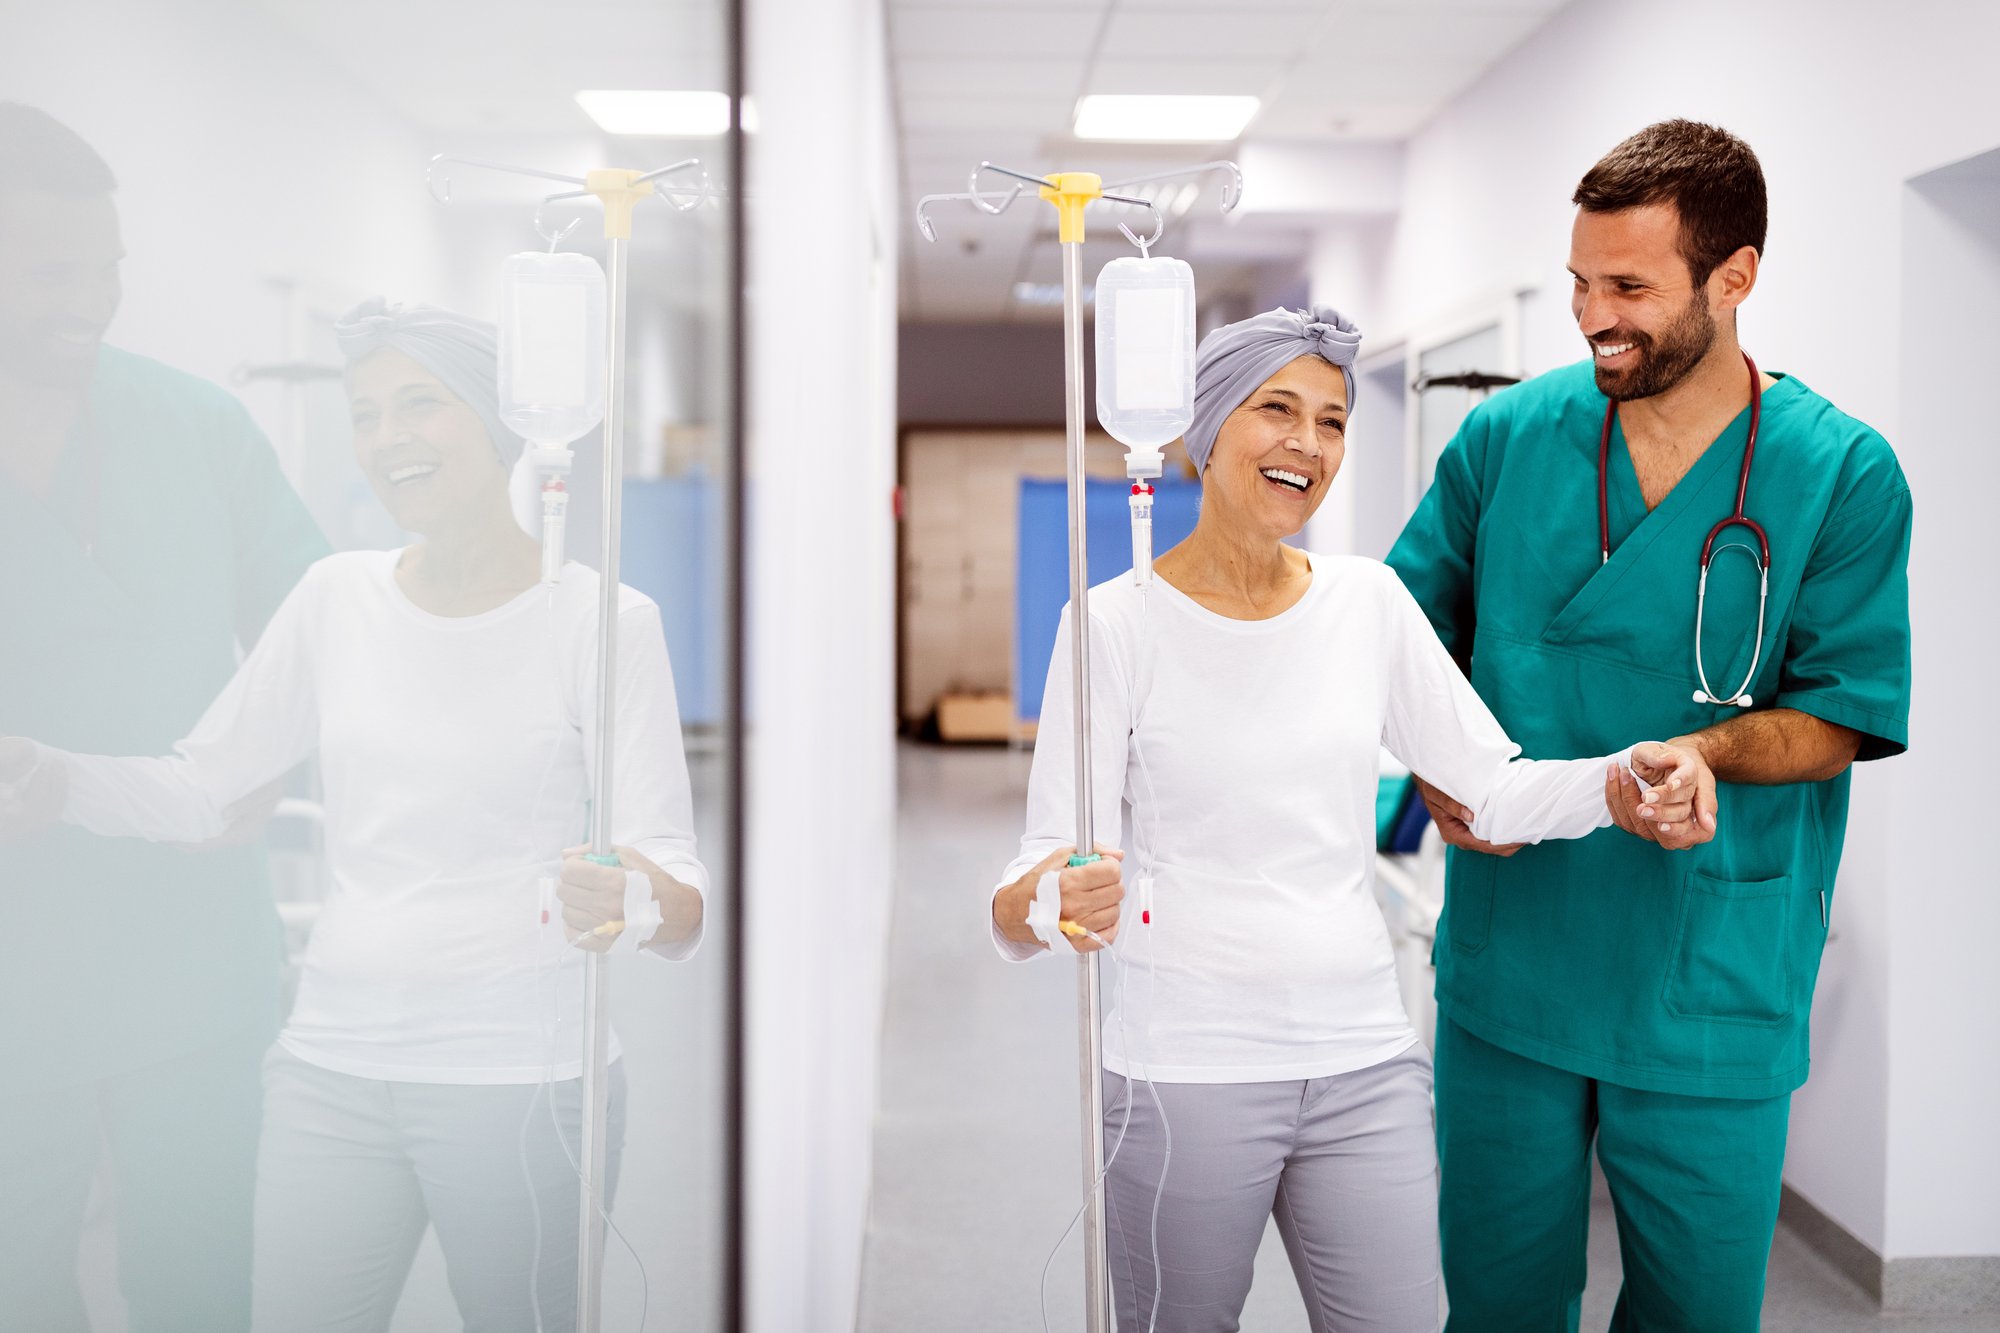 how to become an oncology nurse